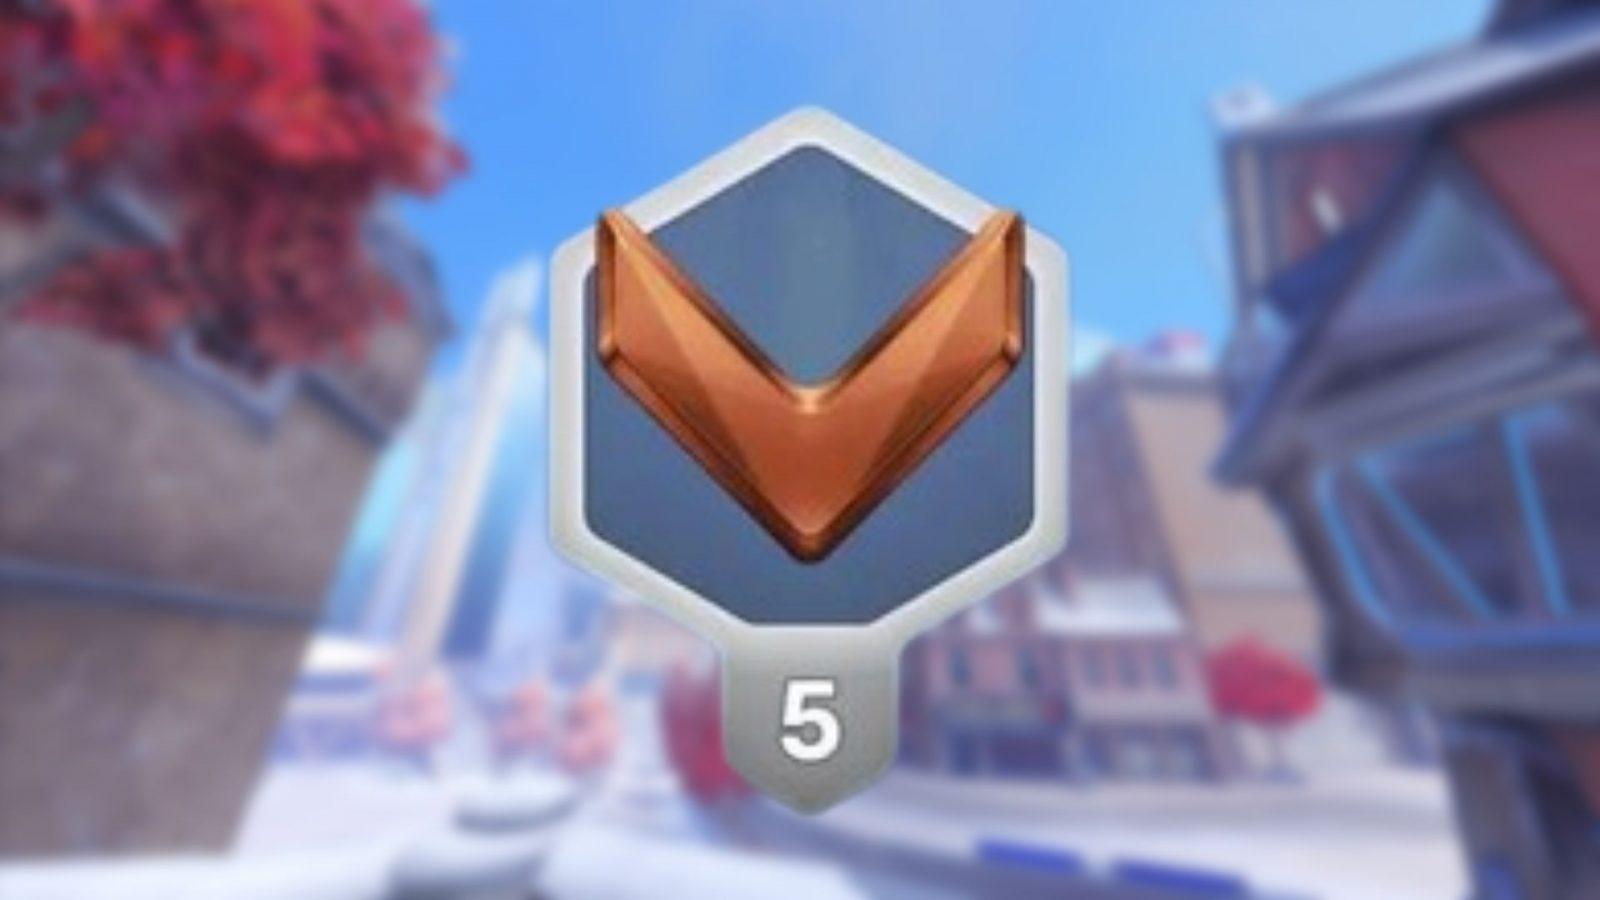 bronze 5 rank picture in overwatch 2 competitive mode